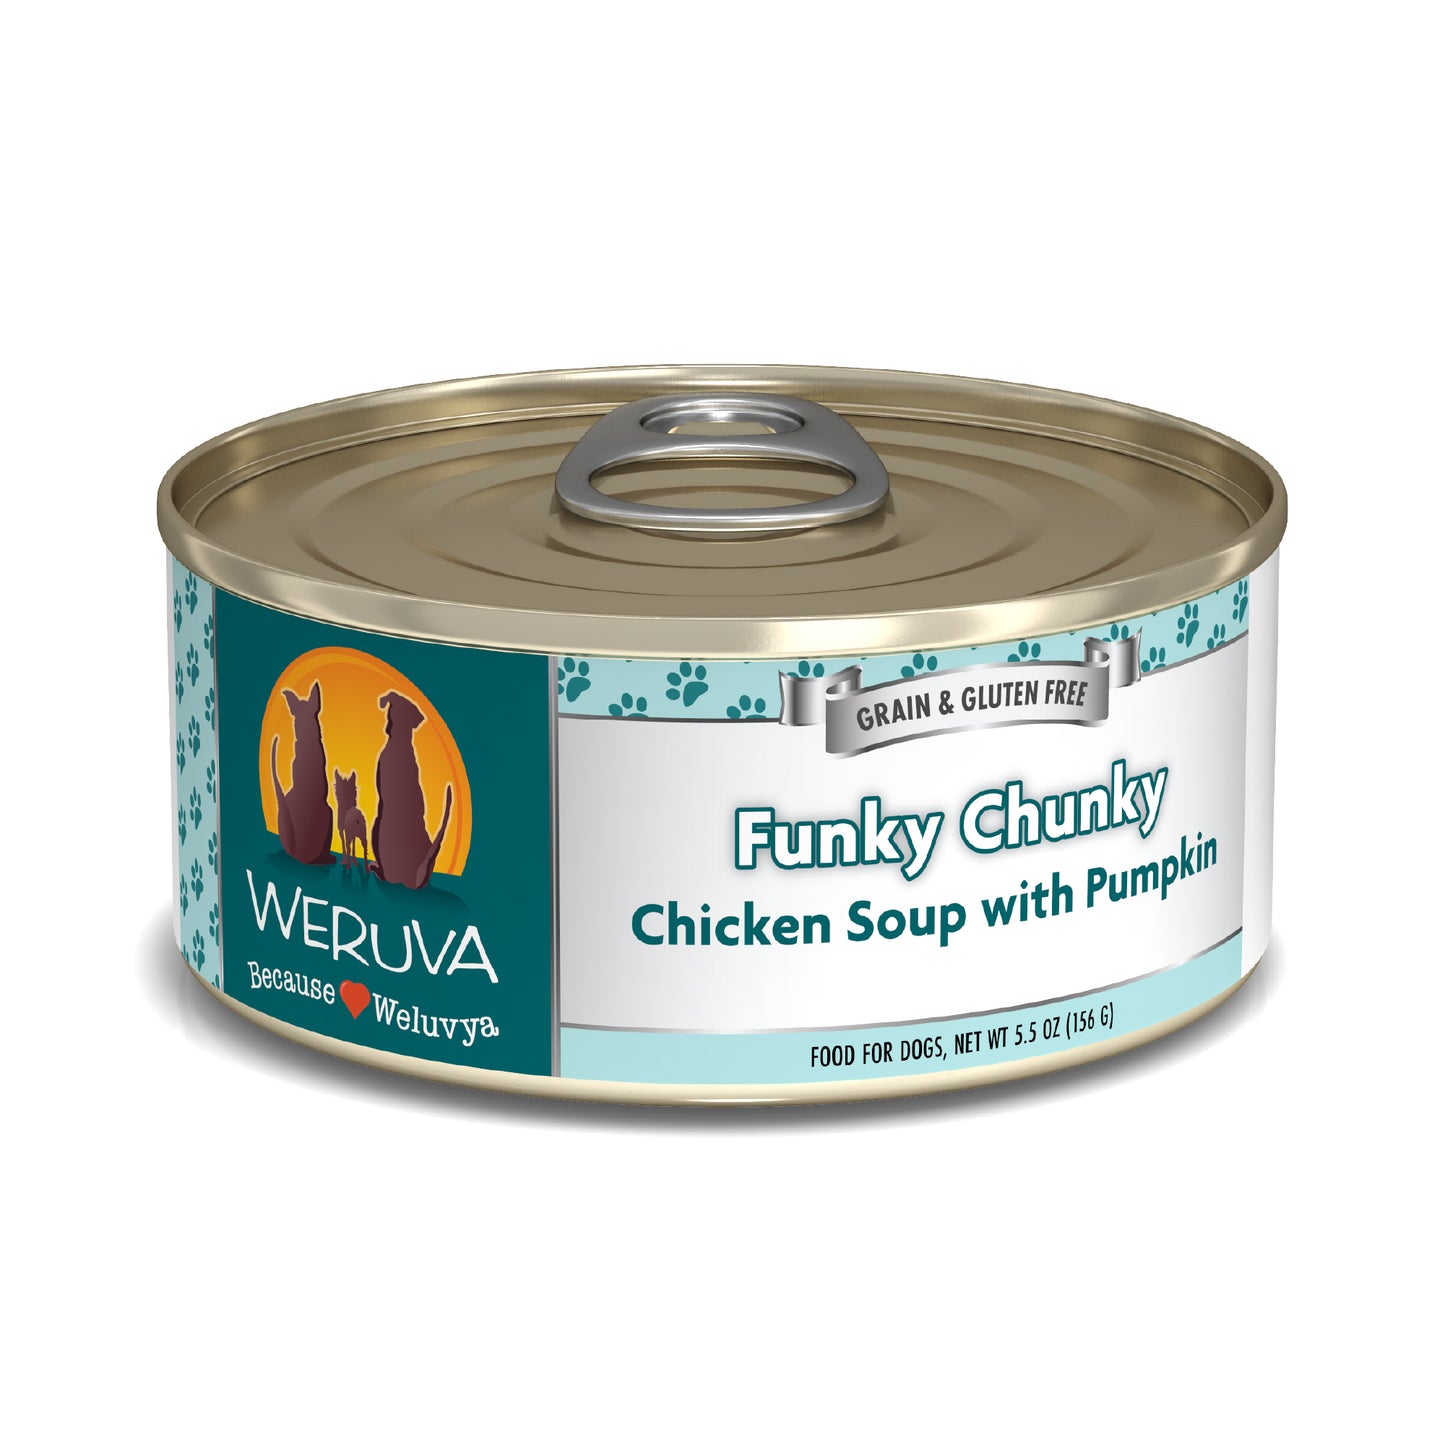 Weruva Classic Dog food 5.5oz Can Funky Chunky Chicken Soup with Chicken Breast & Pumpkin